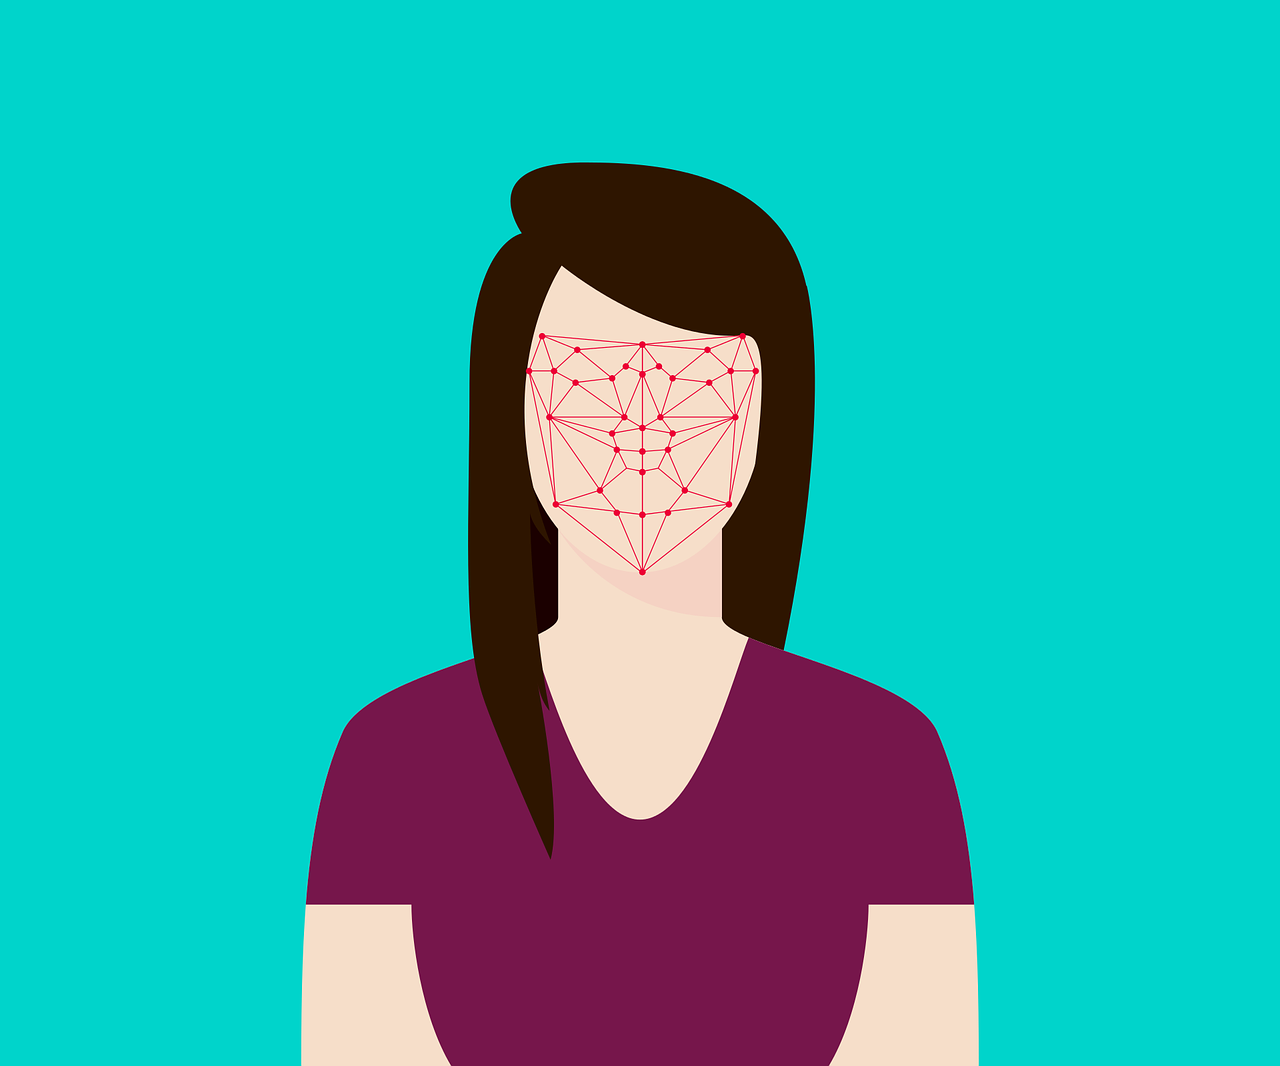 7 Tips to Help Make Face ID More Reliable